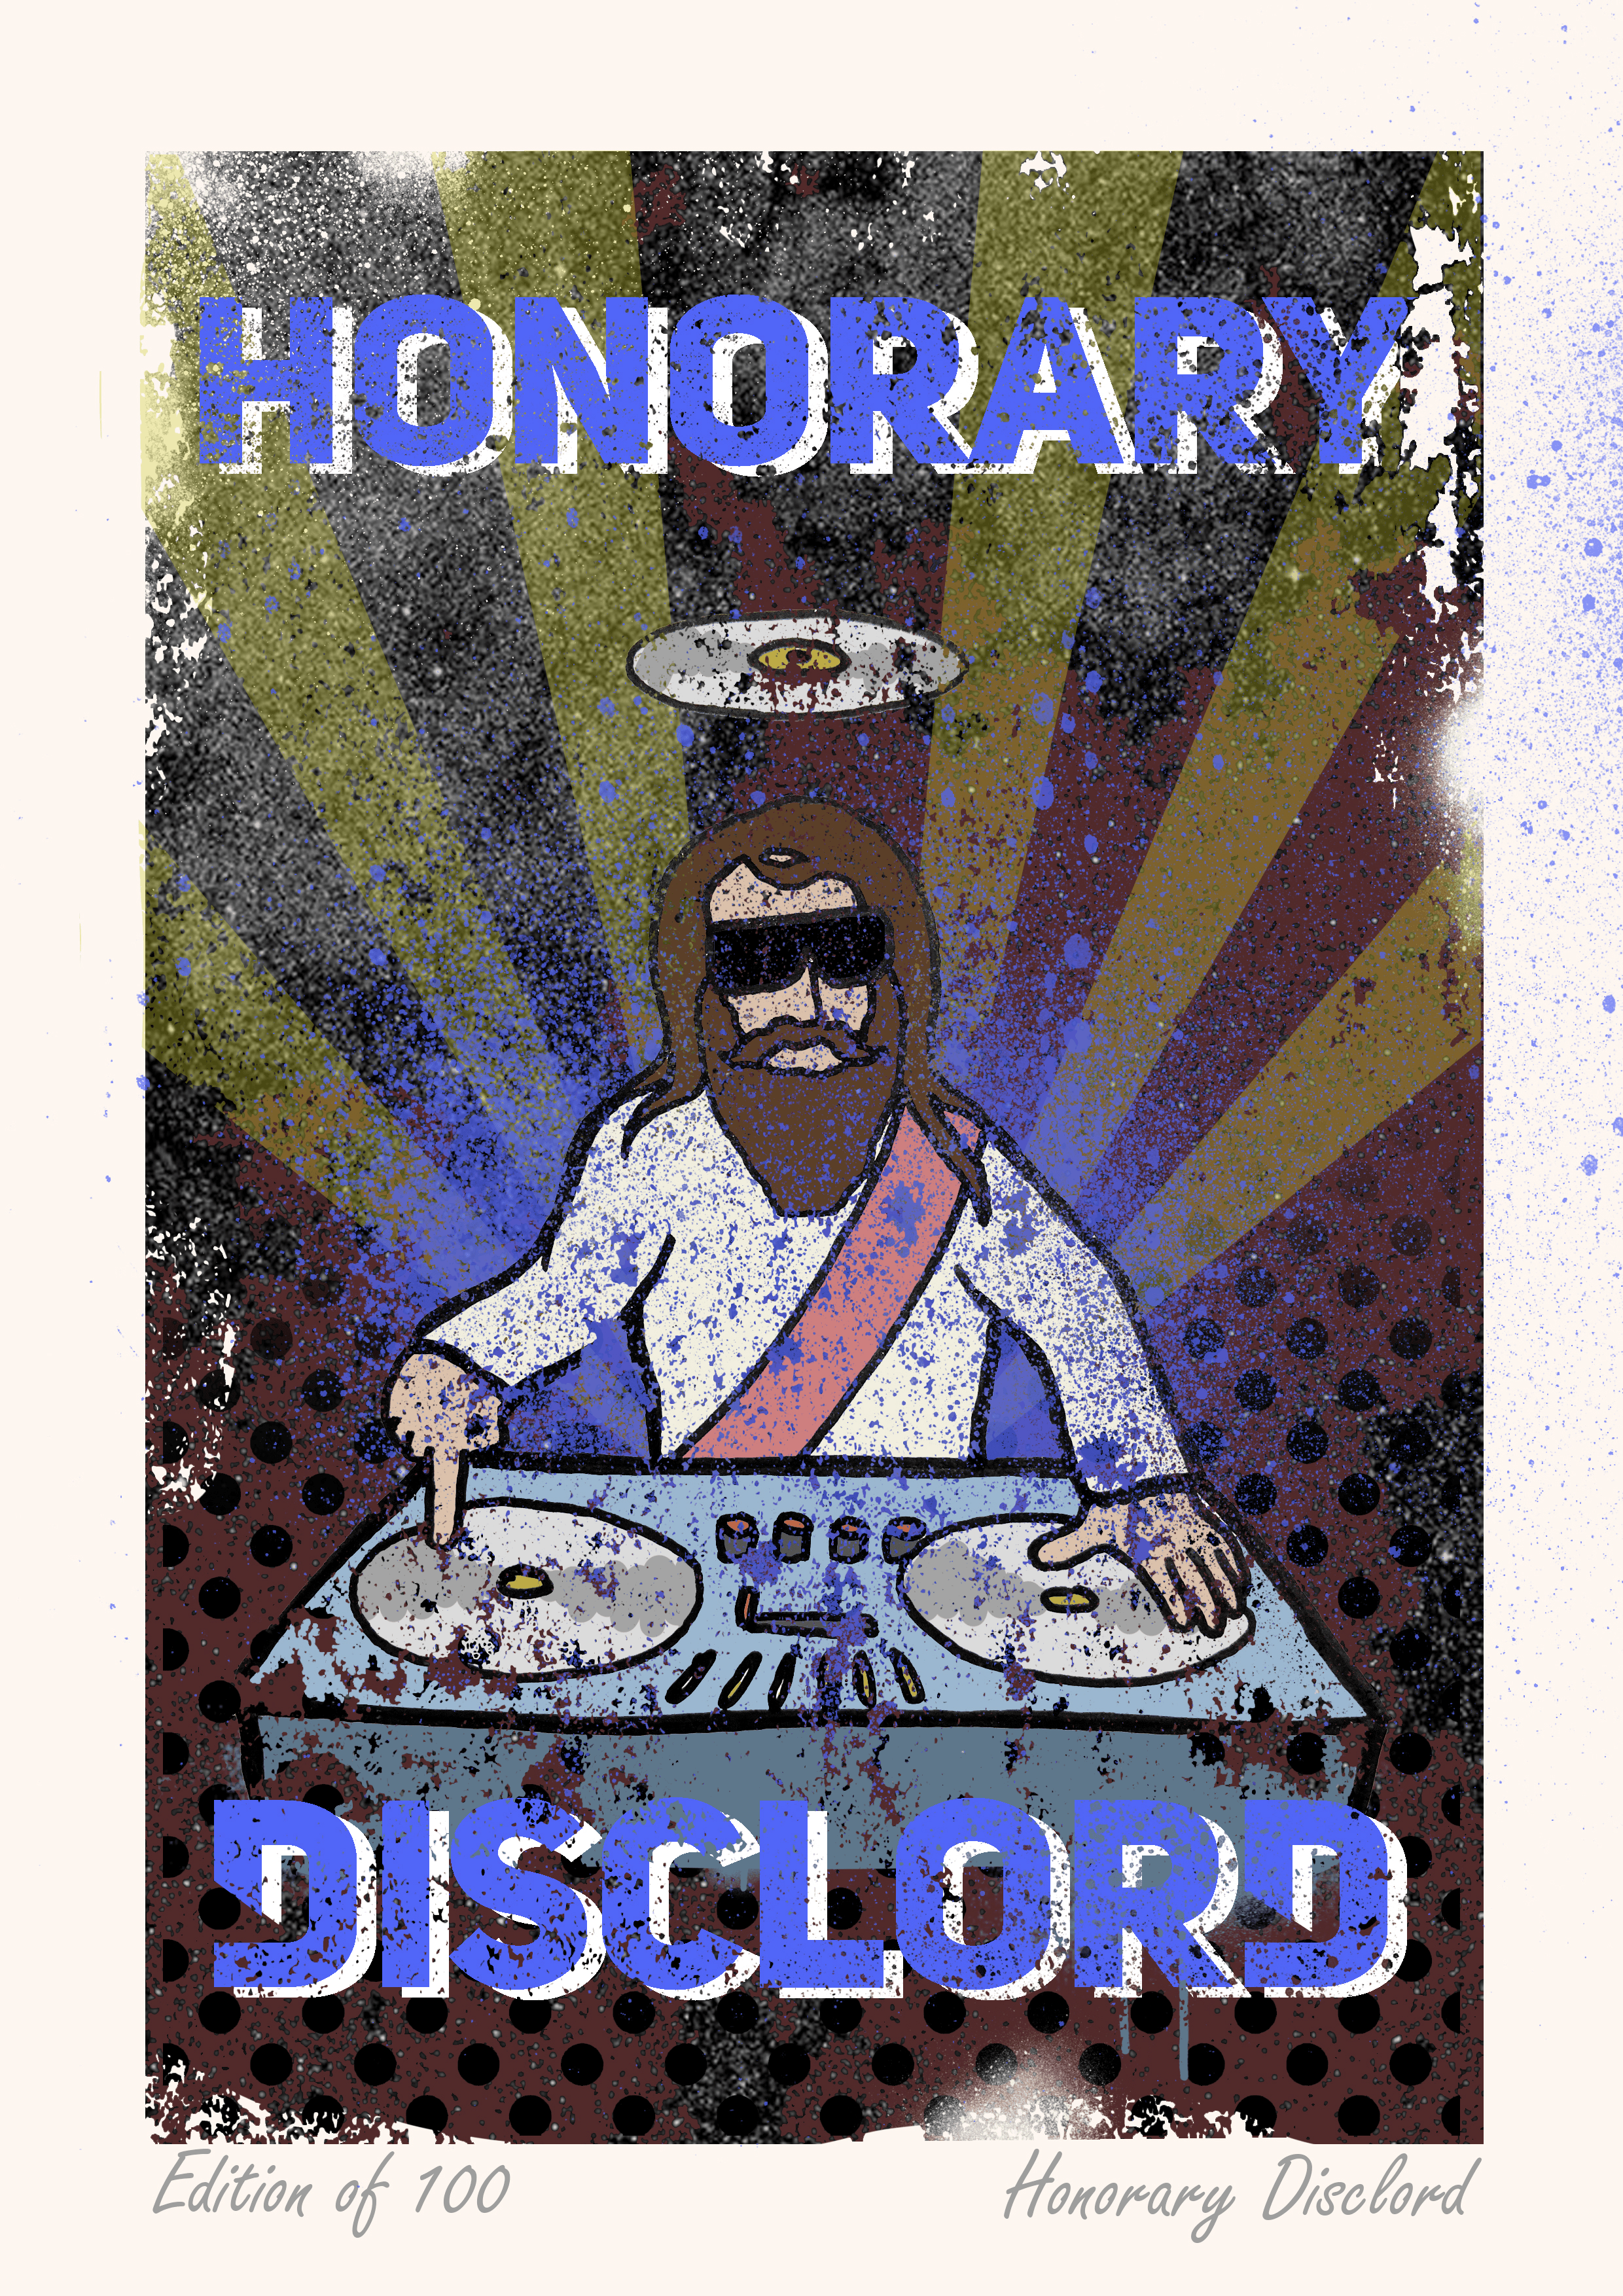 Honorary DiscLord